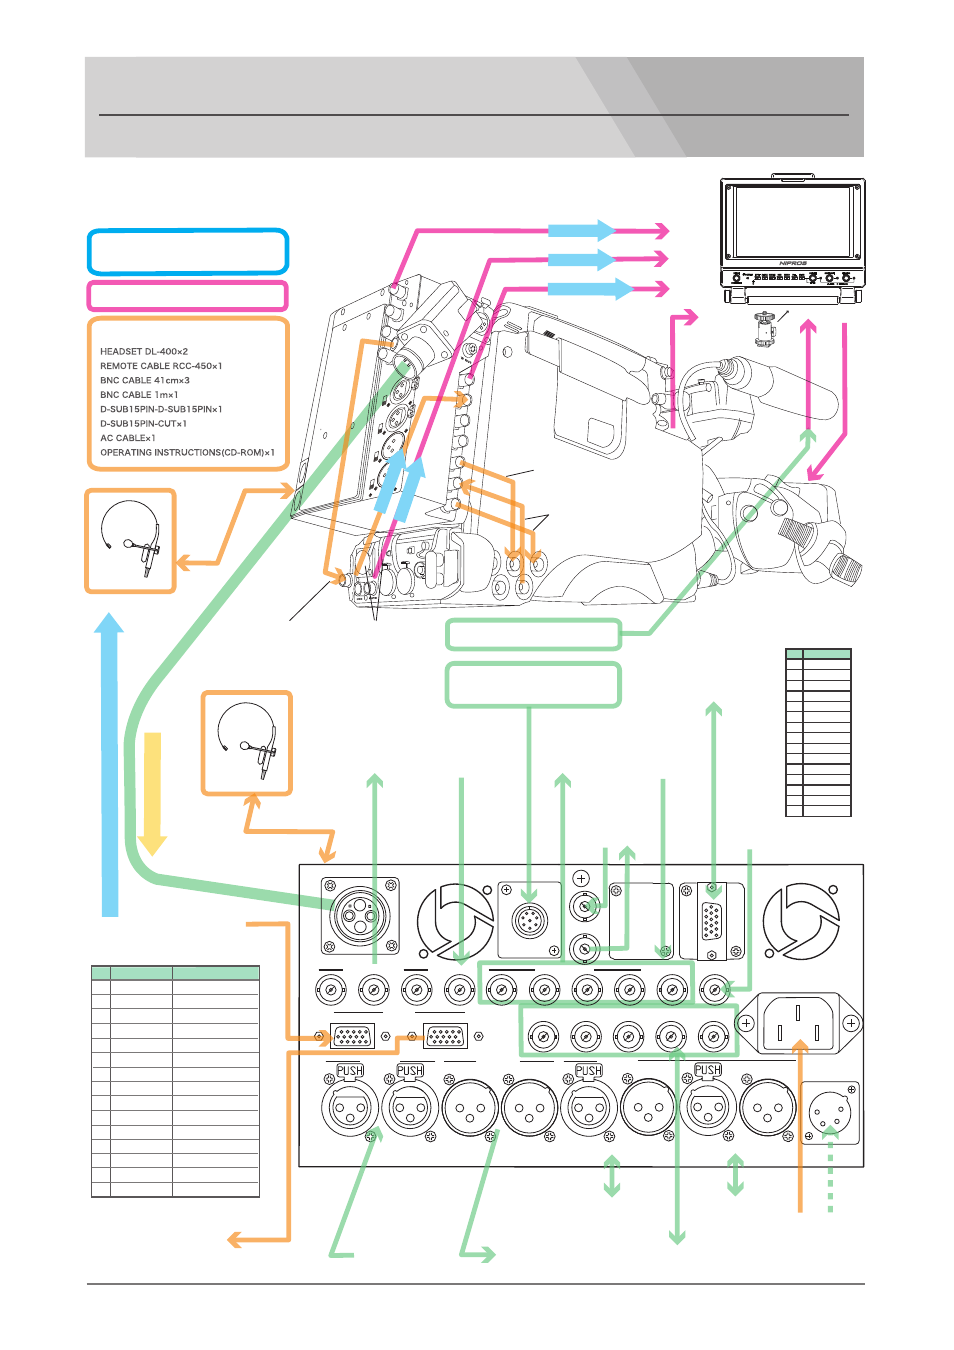 LS-800 System Connection Manual